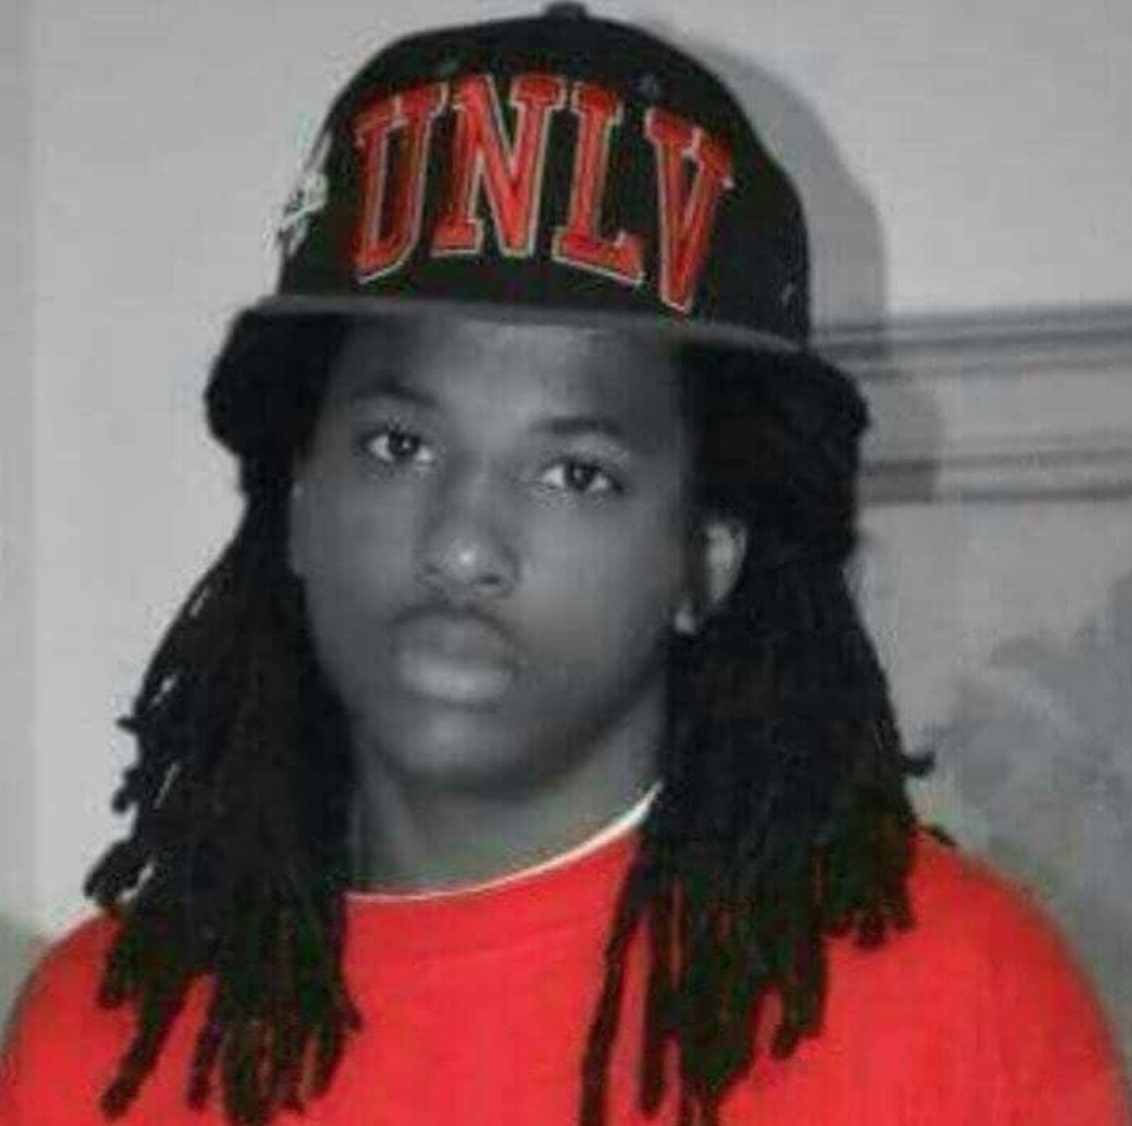 Lowndes County Sheriff Says They Will Give $500,000 Reward In Exchange For Information On Kendrick Johnson Case